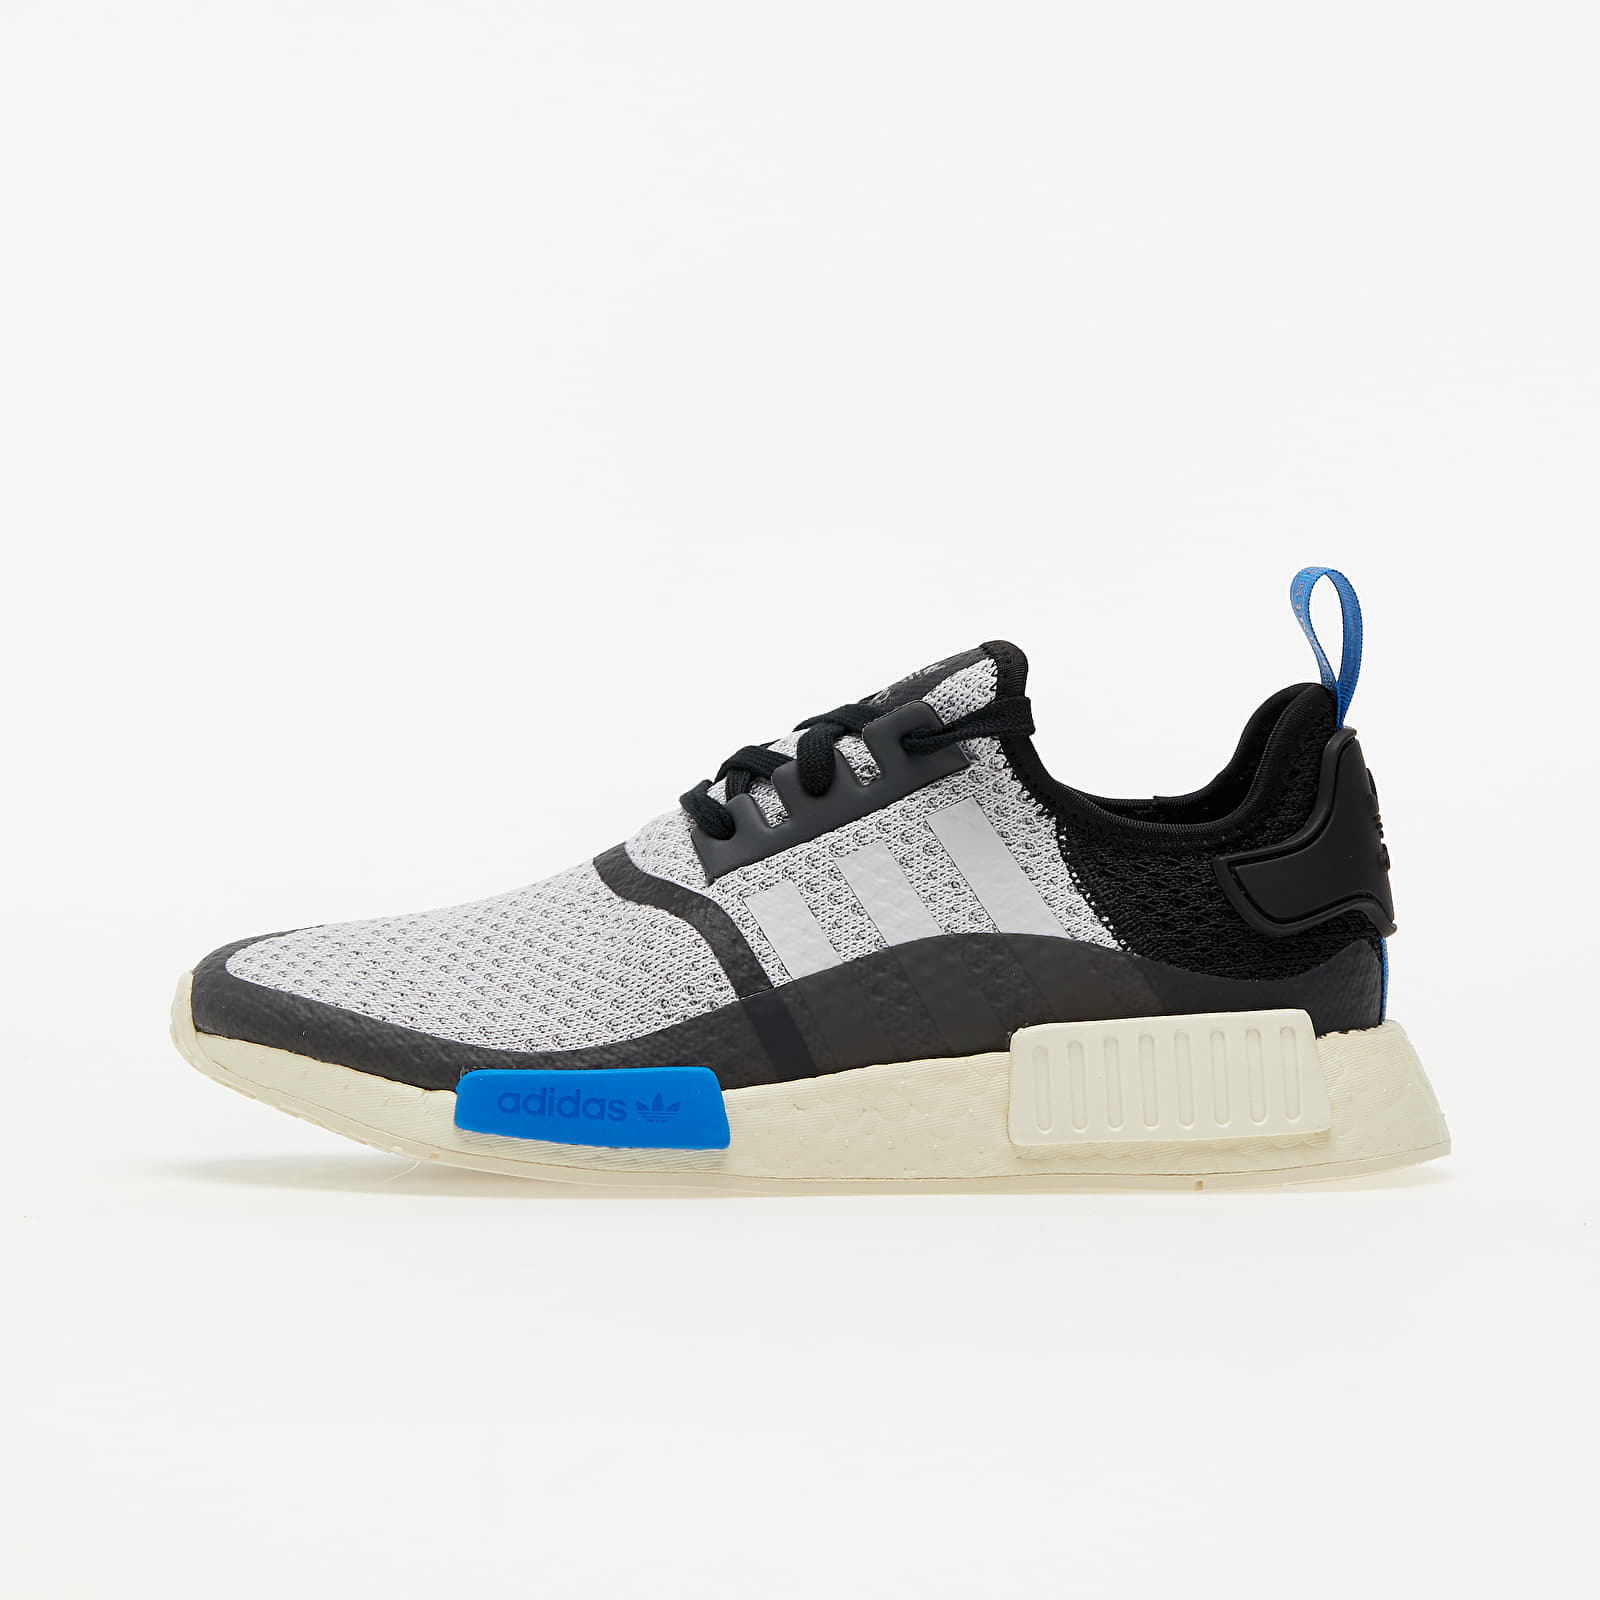 Chaussures et baskets homme adidas NMD_R1 Dash Grey/ Core Black/ Glory Blue